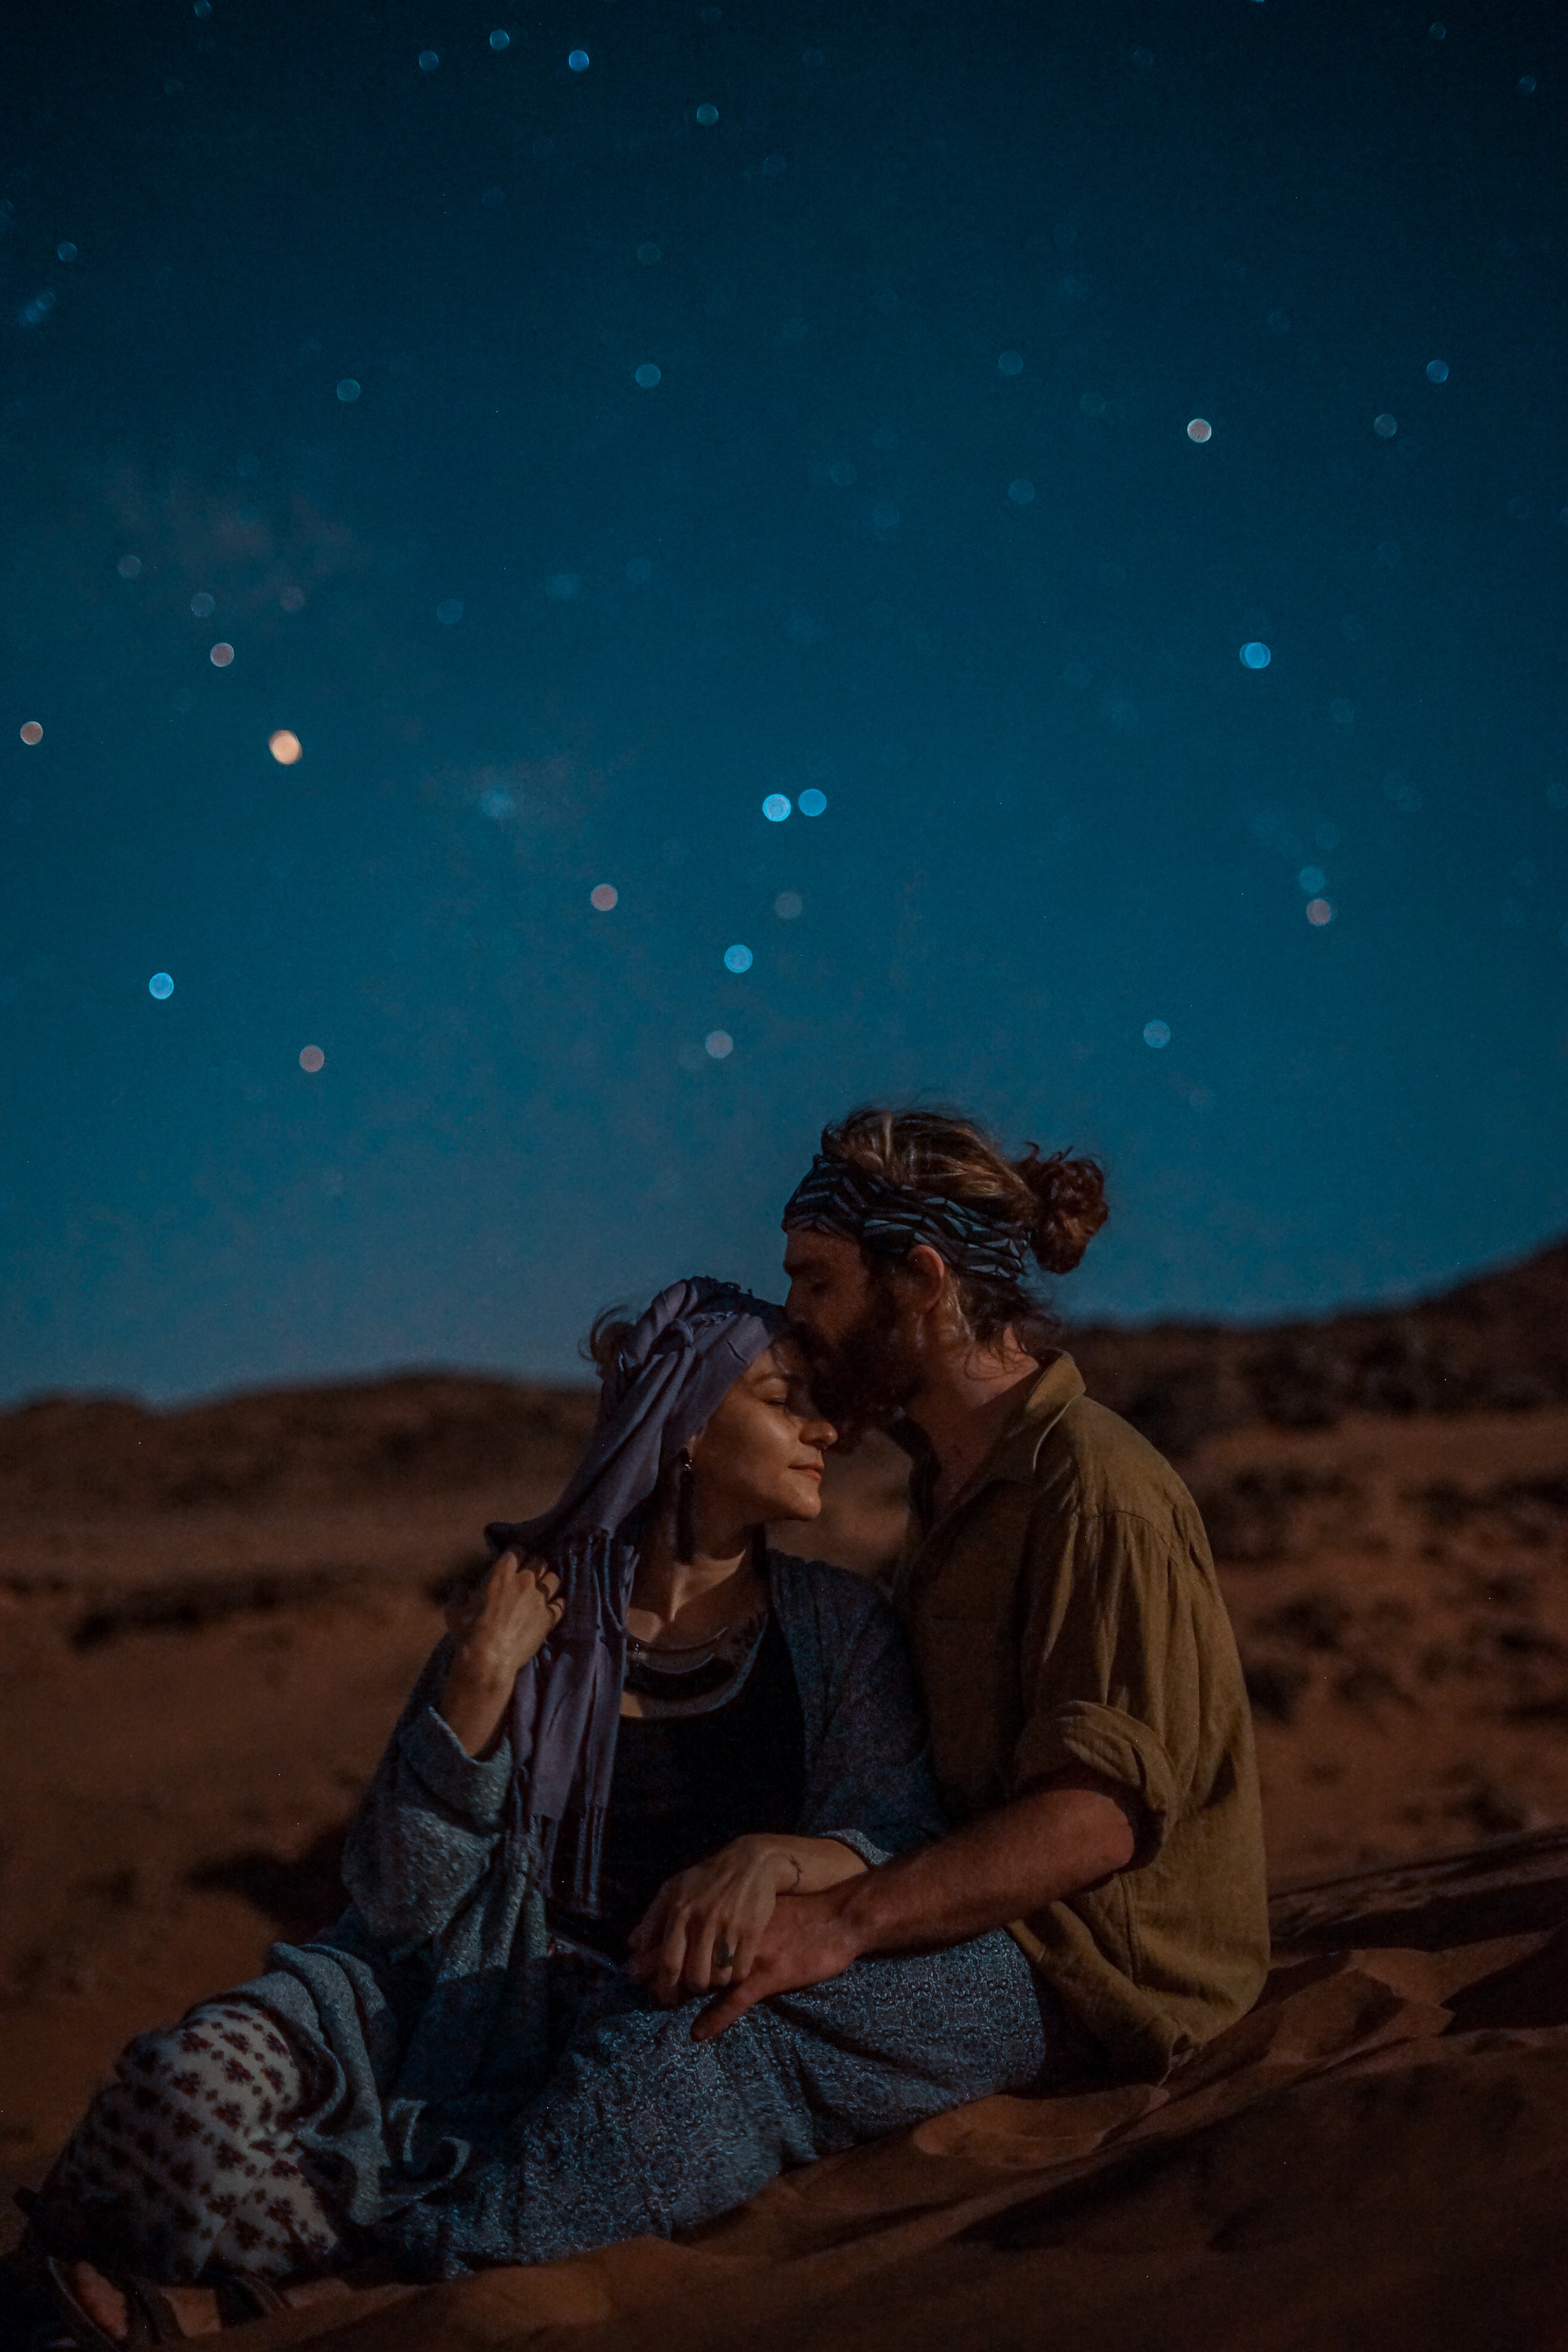 A couple in the desert. | Source: Unsplash